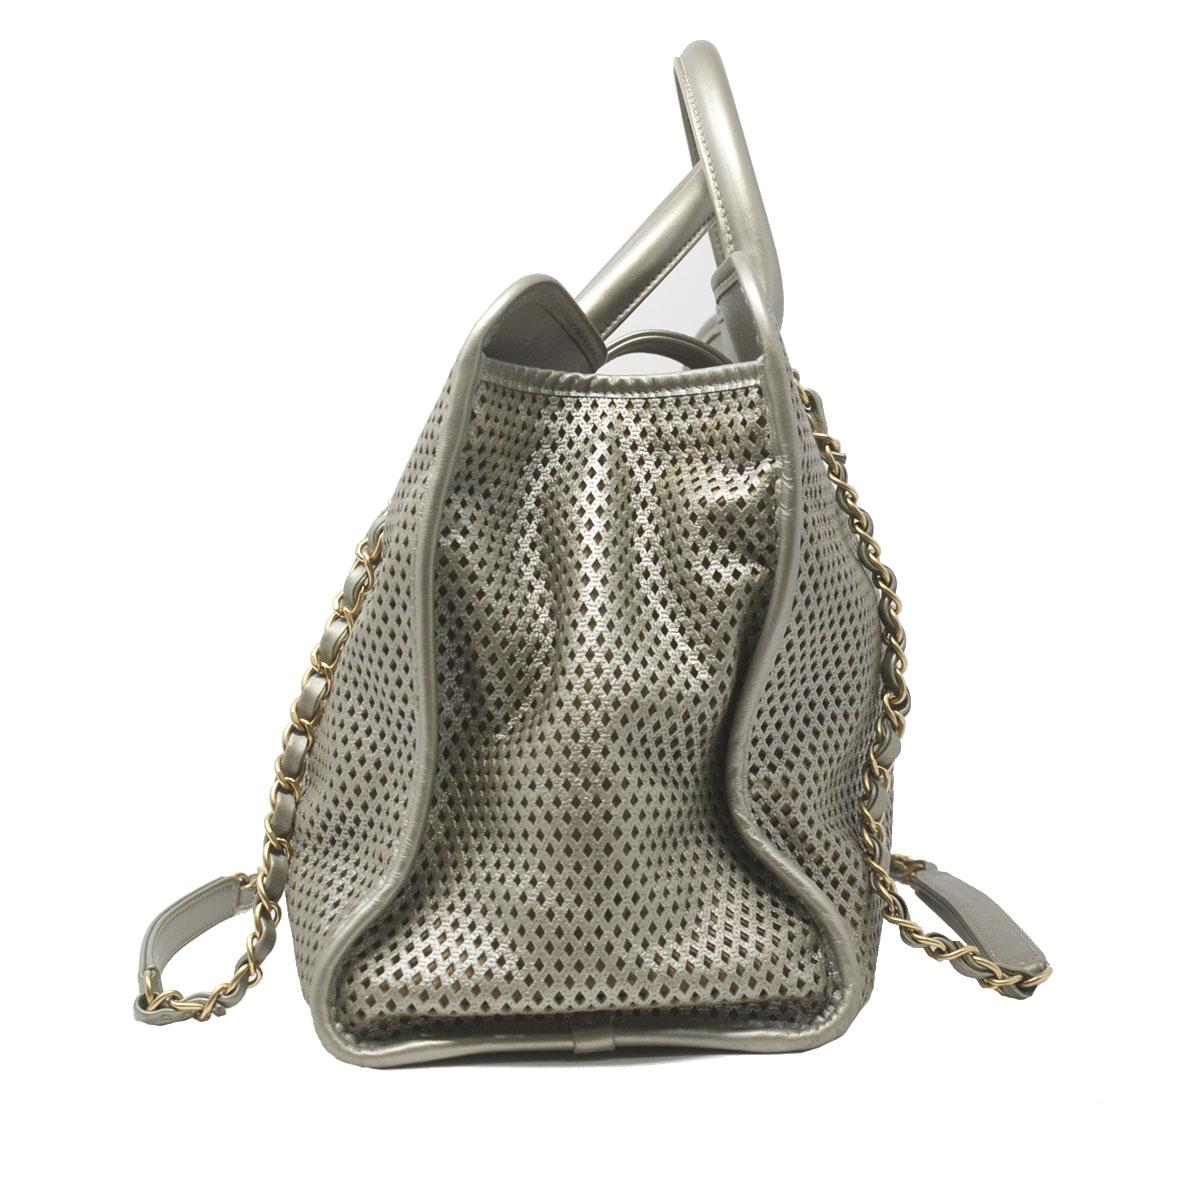 Women's Chanel Gray Metallic GHW Perforated Leather Tote Handbag With Card